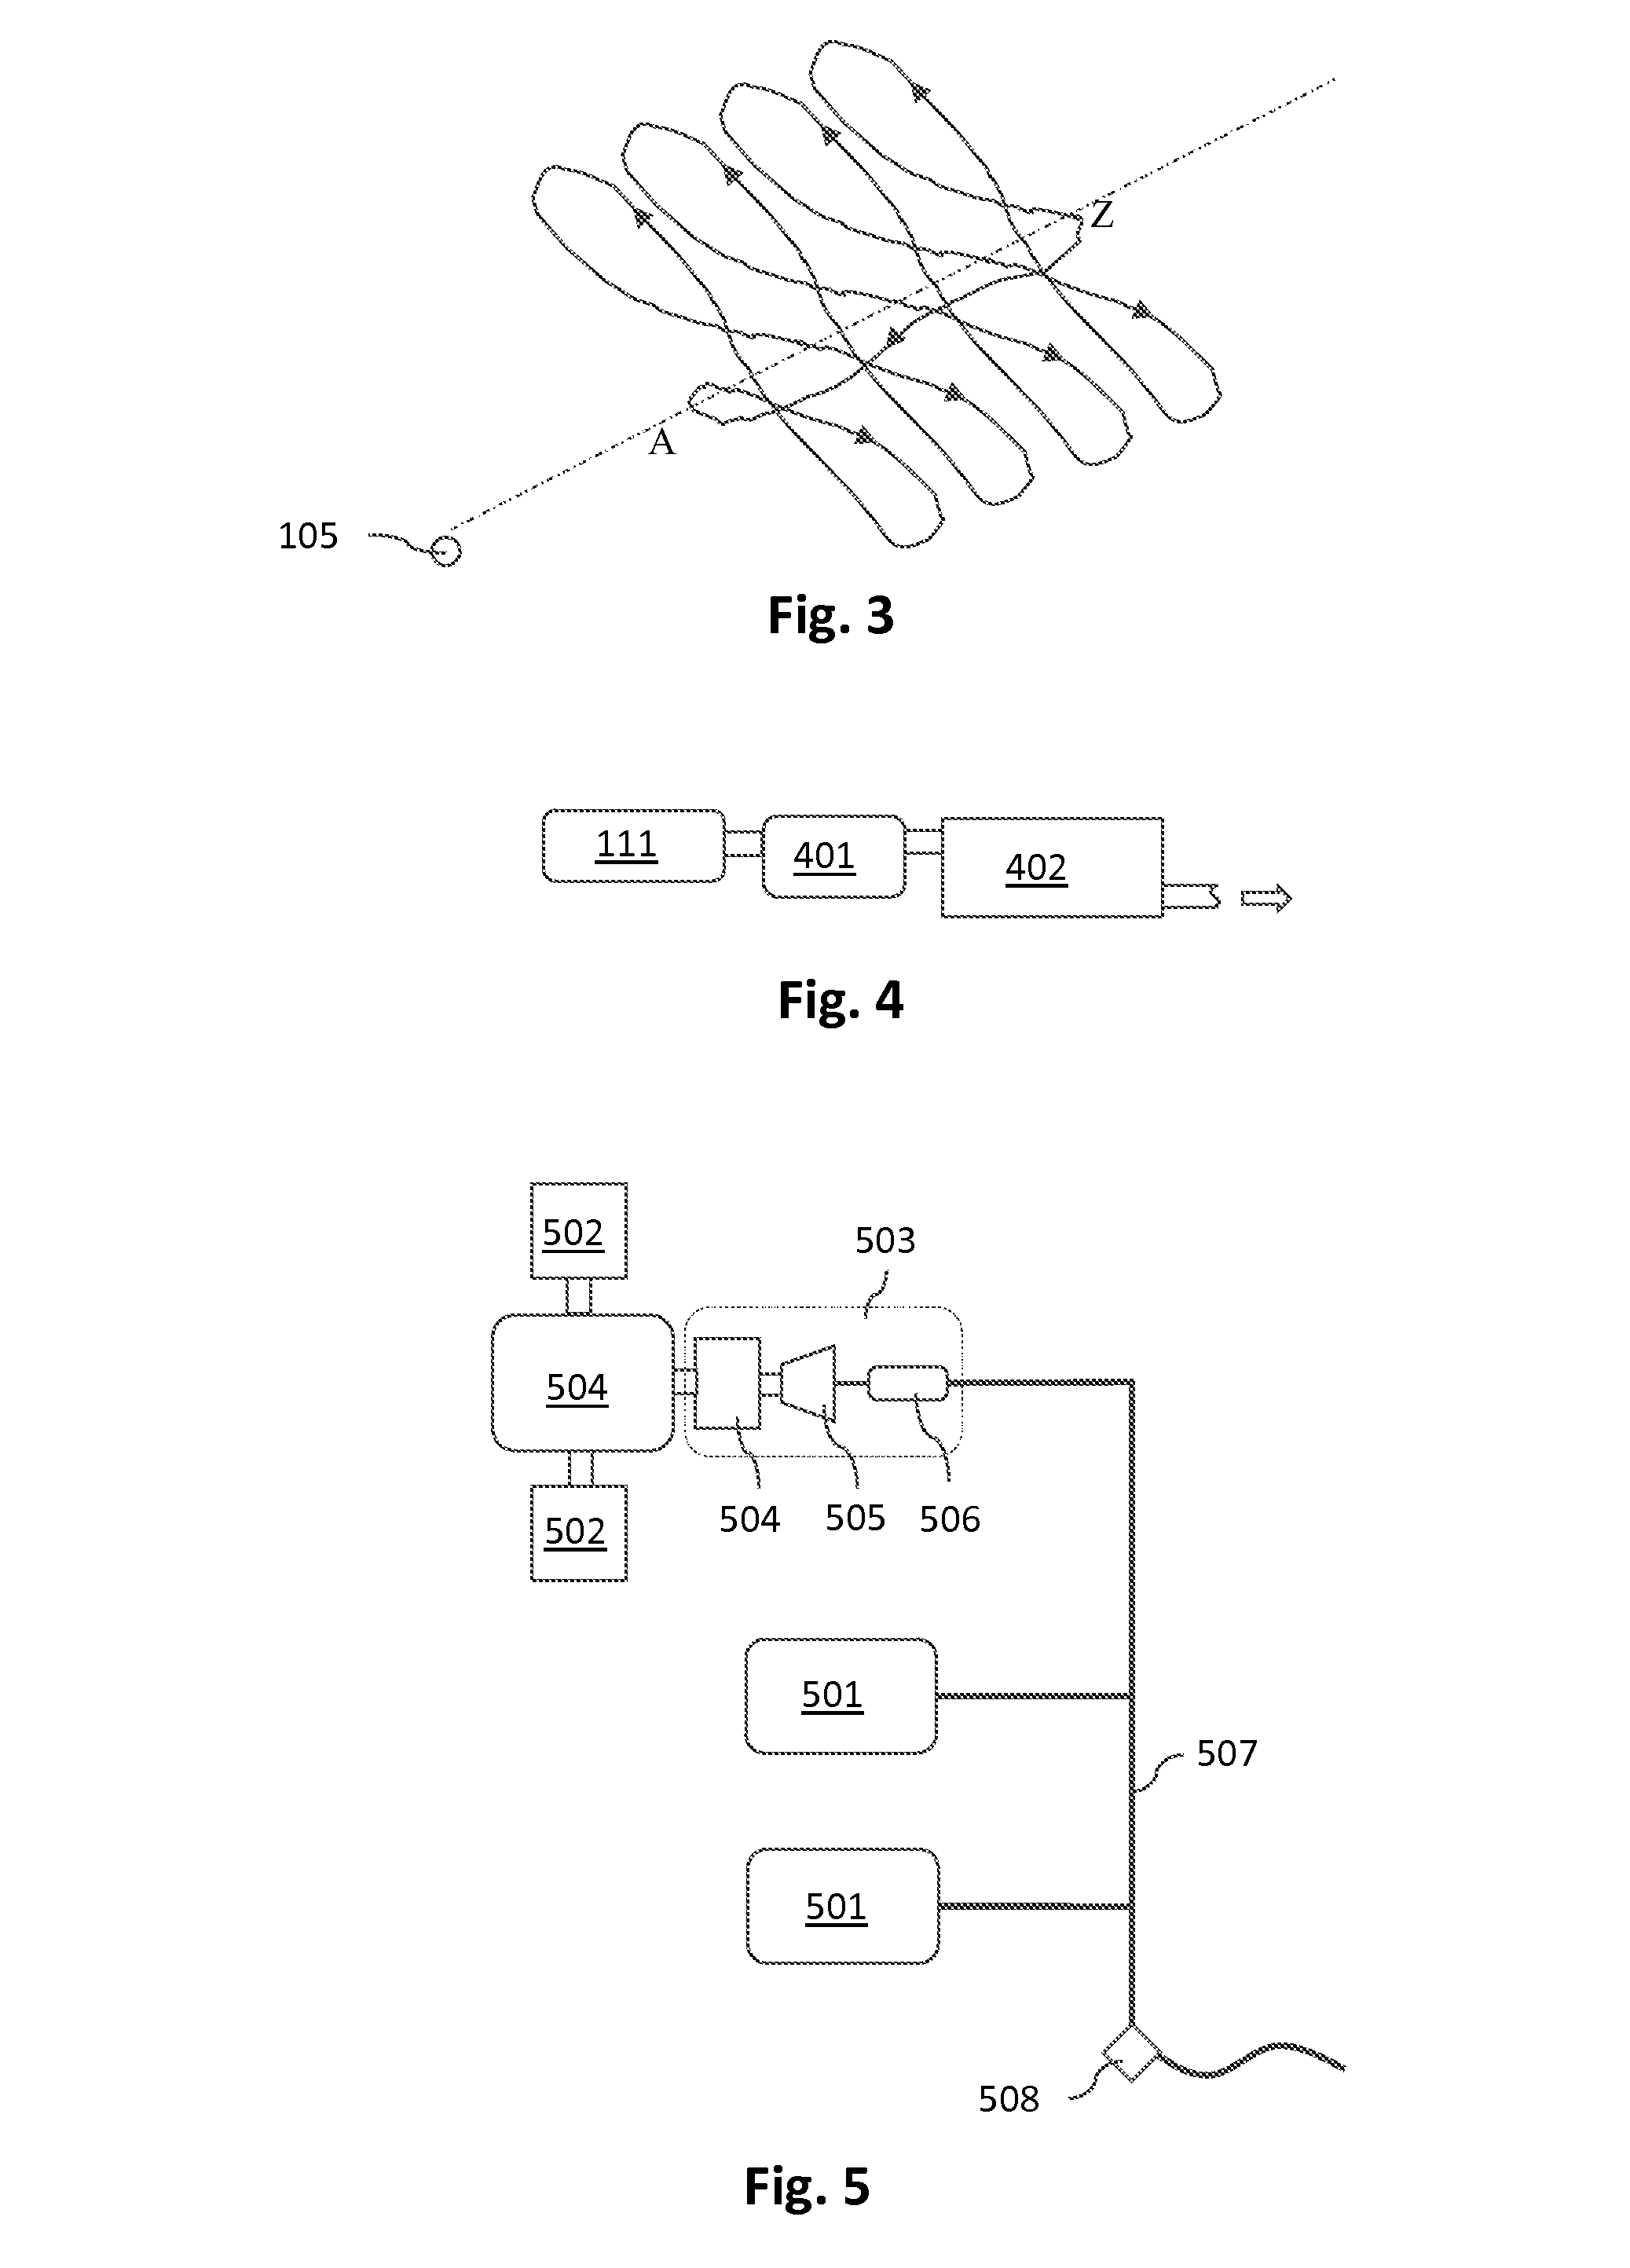 Airborne wind energy system for electricity generation, energy storage, and other uses